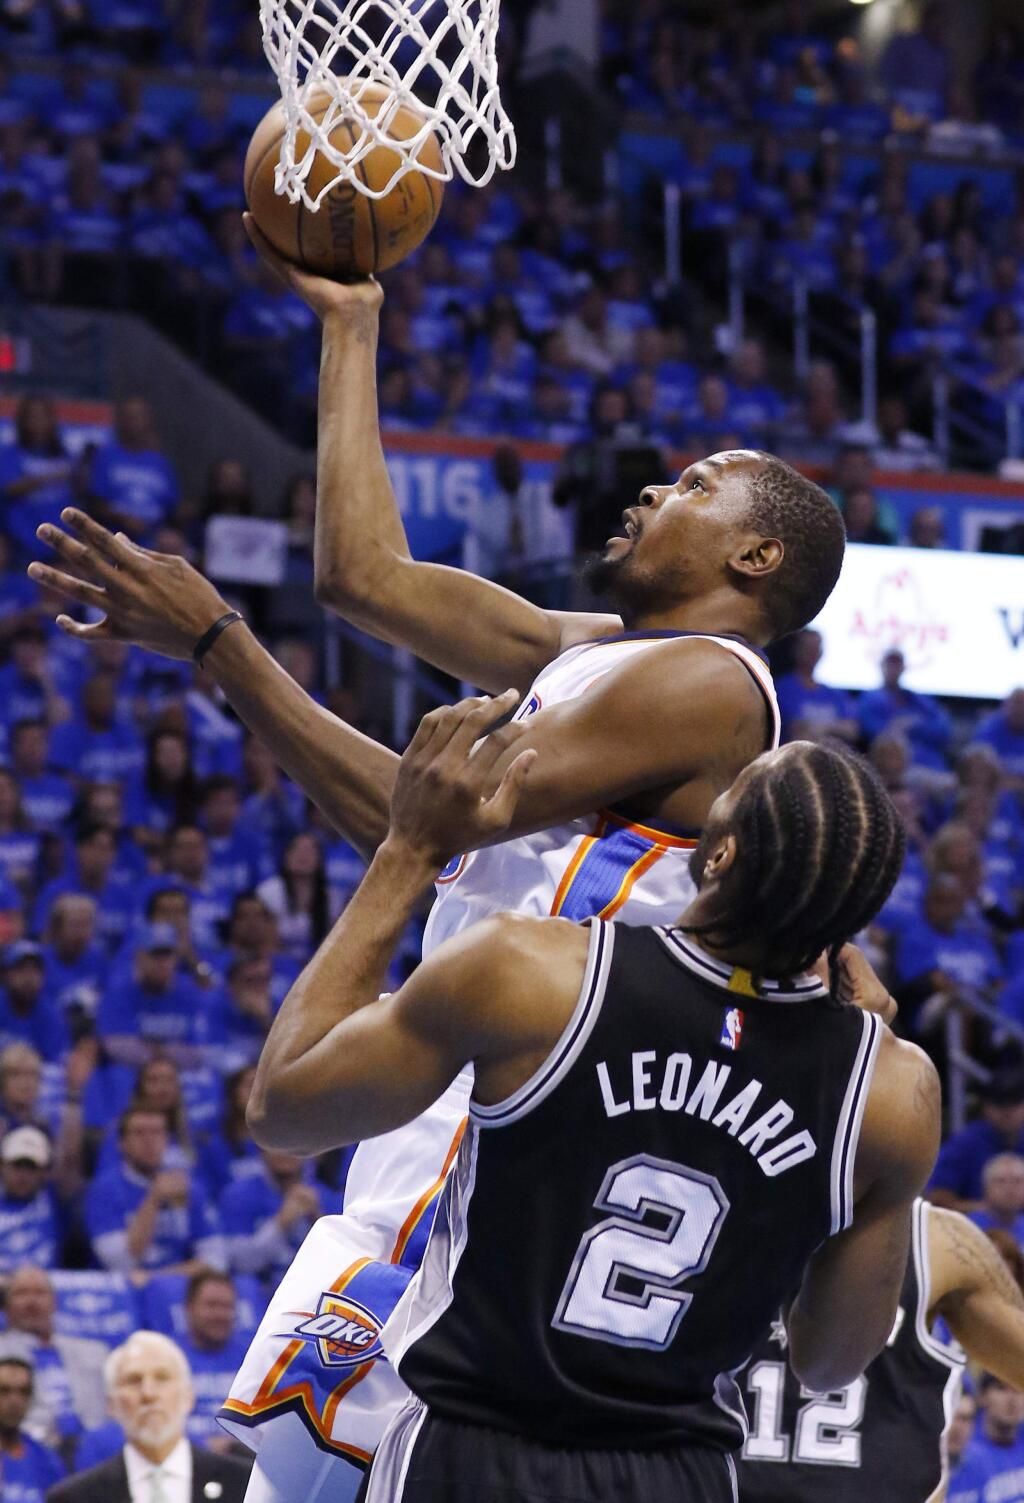 Oklahoma City Thunder forward Kevin Durant, left, shoots in front of San Antonio Spurs forward Kawhi Leonard (2) in the first quarter of Game 6 of a second-round NBA basketball playoff series in Oklahoma City, Thursday, May 12, 2016. (AP Photo/Alonzo Adams)